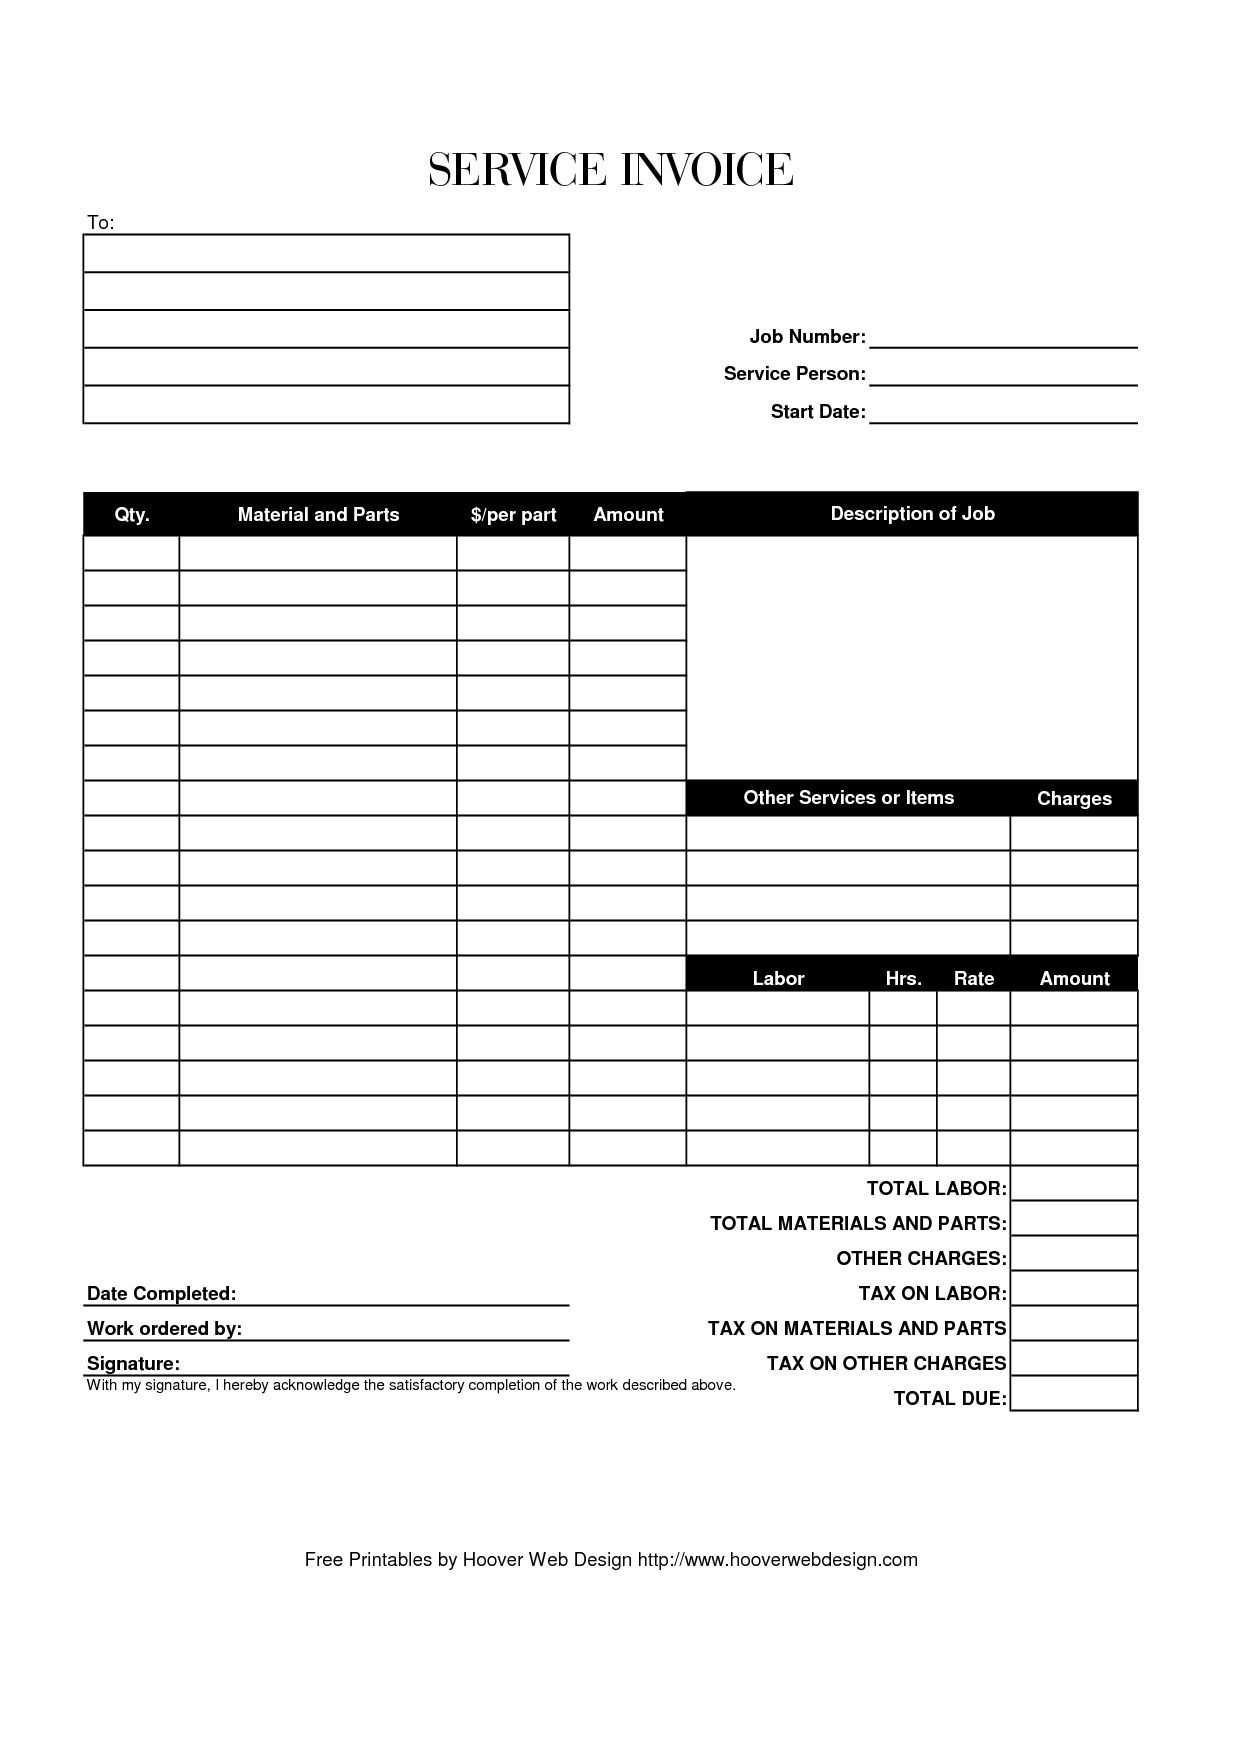 Free Blank Invoice Template Lovely Service Invoice 28 Intended For Free Printable Invoice Template Microsoft Word